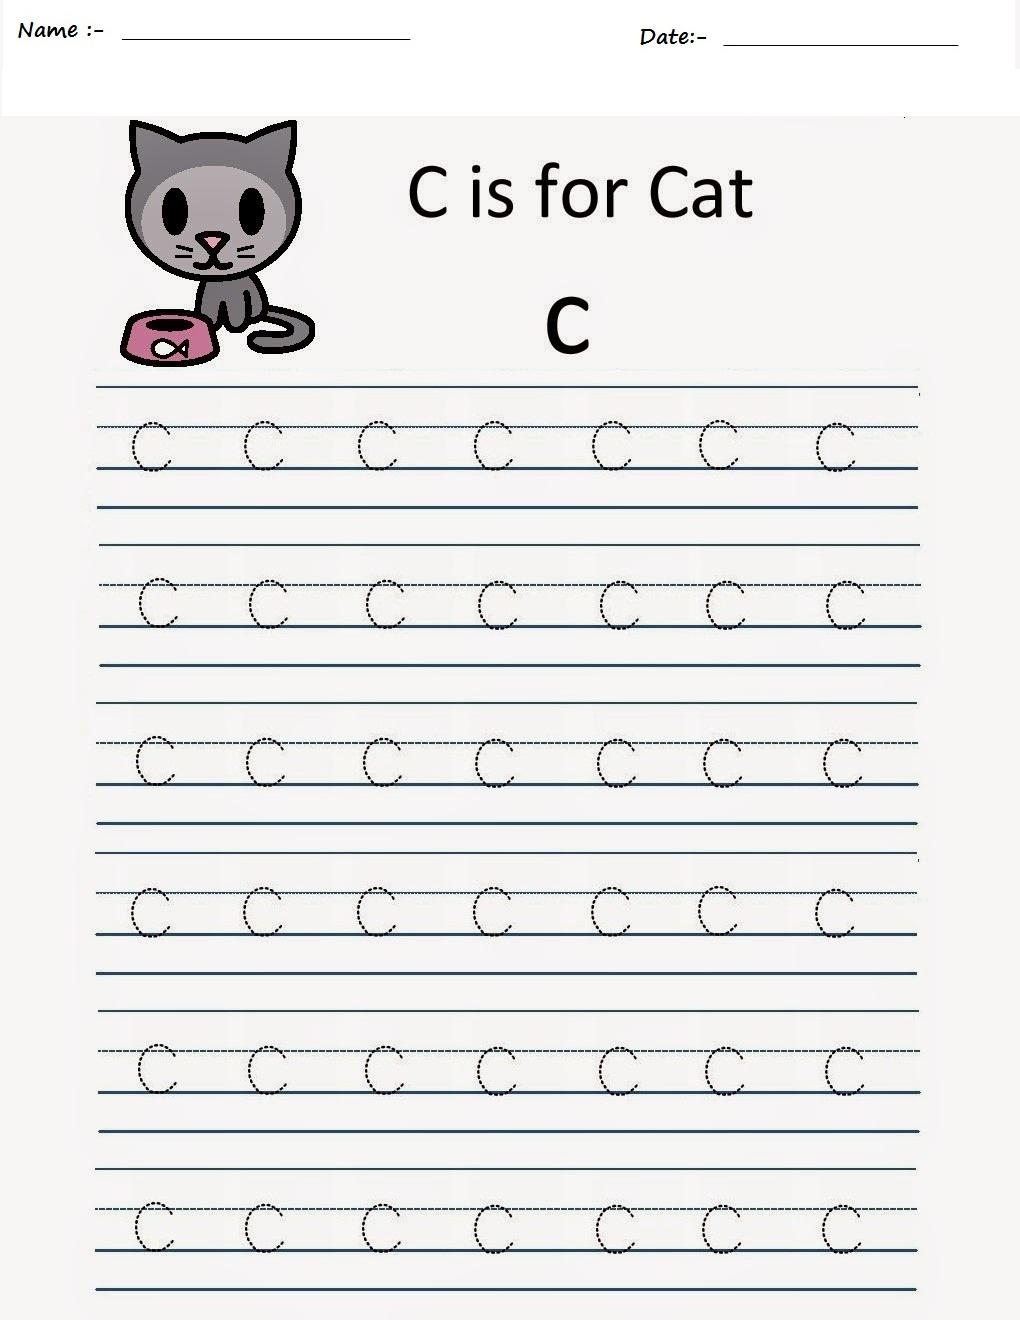 Incredible Letter Tracing Worksheets Image Ideas throughout Letter C Tracing Sheet